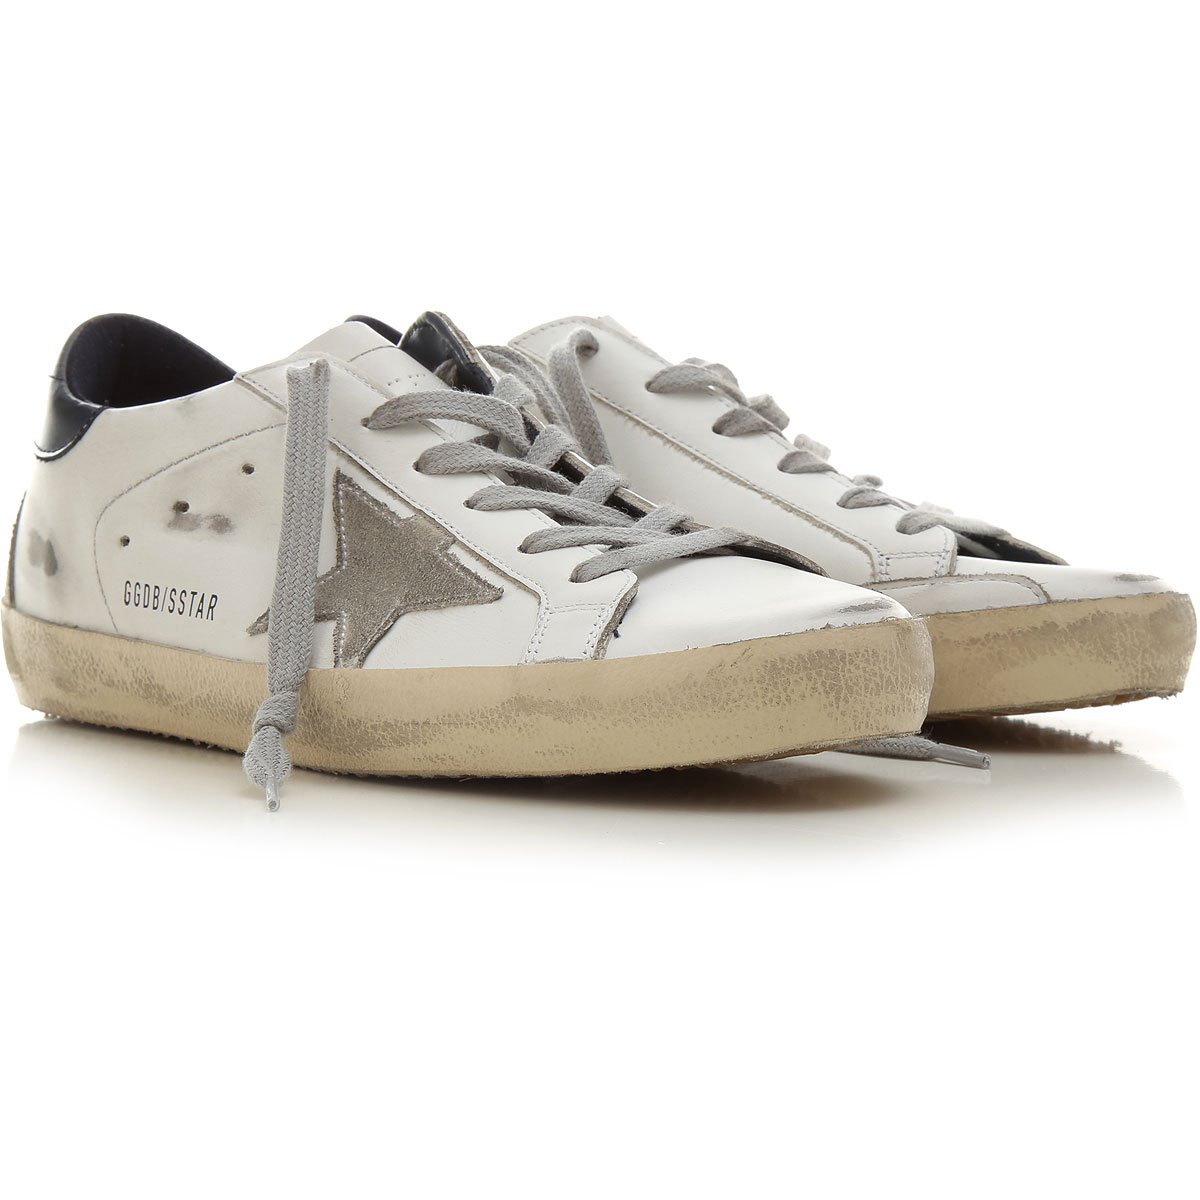 Womens Shoes Golden Goose, Style code: gwf00102-f000311-10270